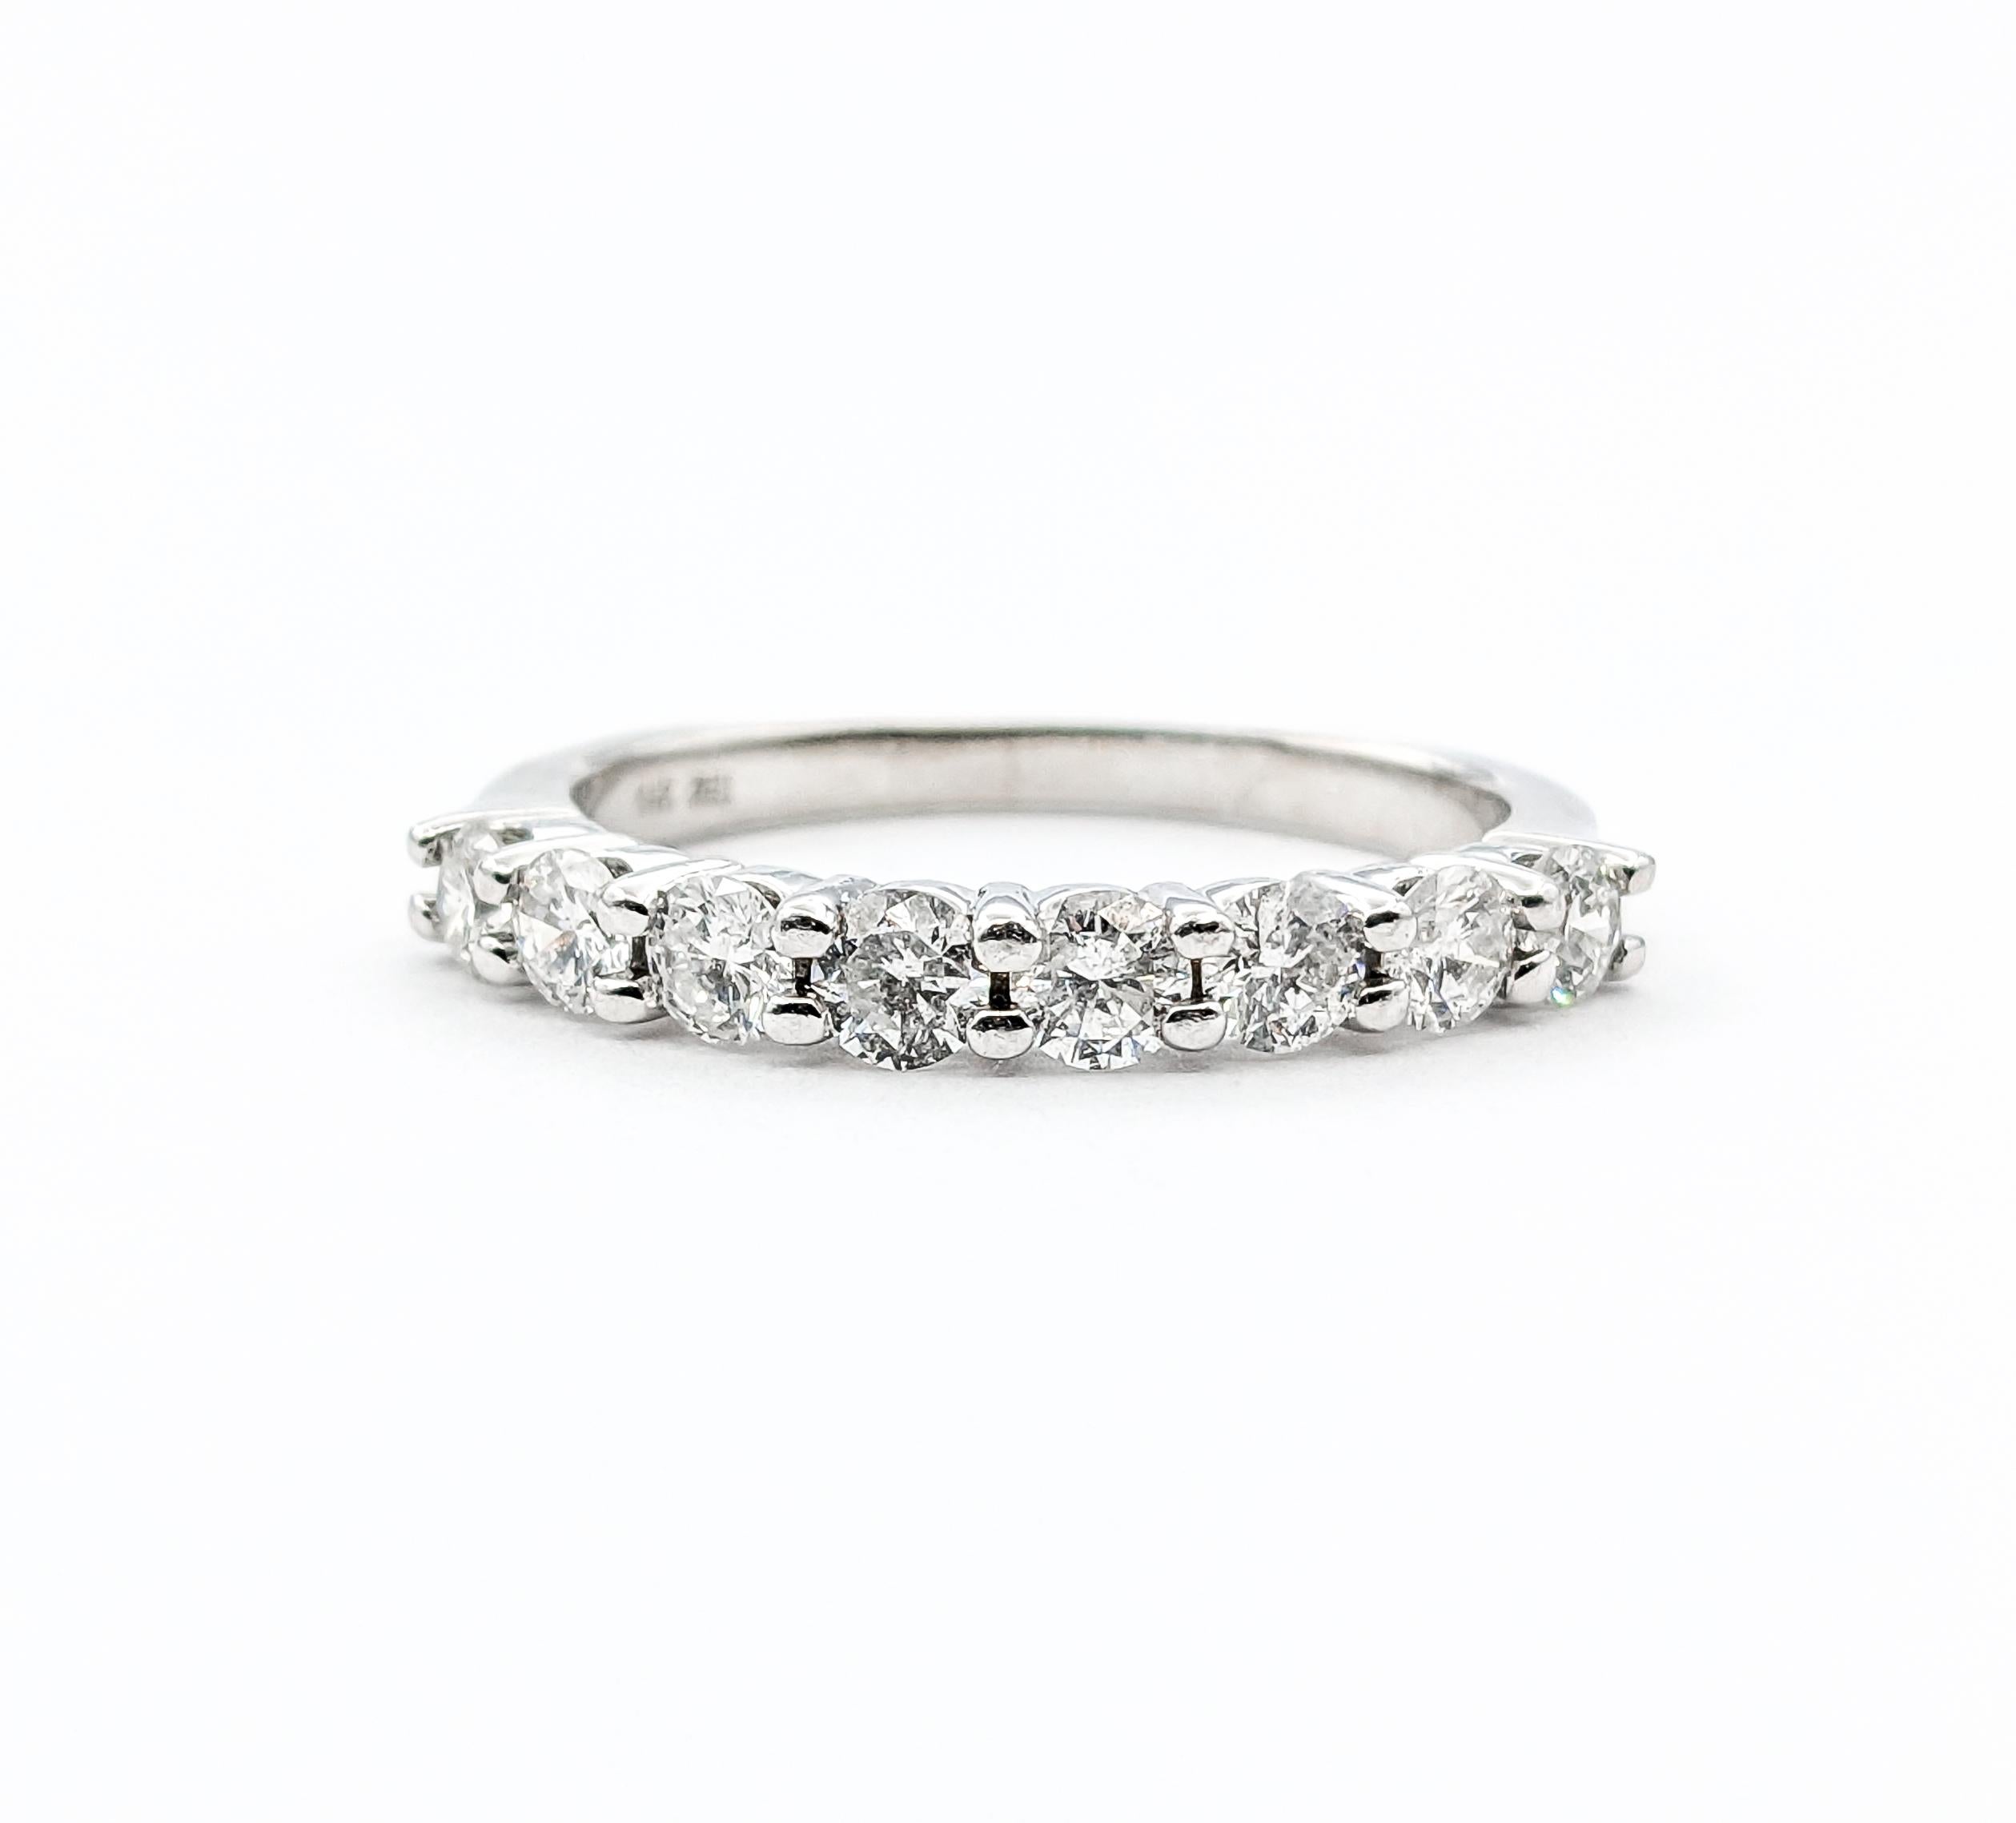 1ctw Diamond Bridal Ring In White Gold For Sale 6